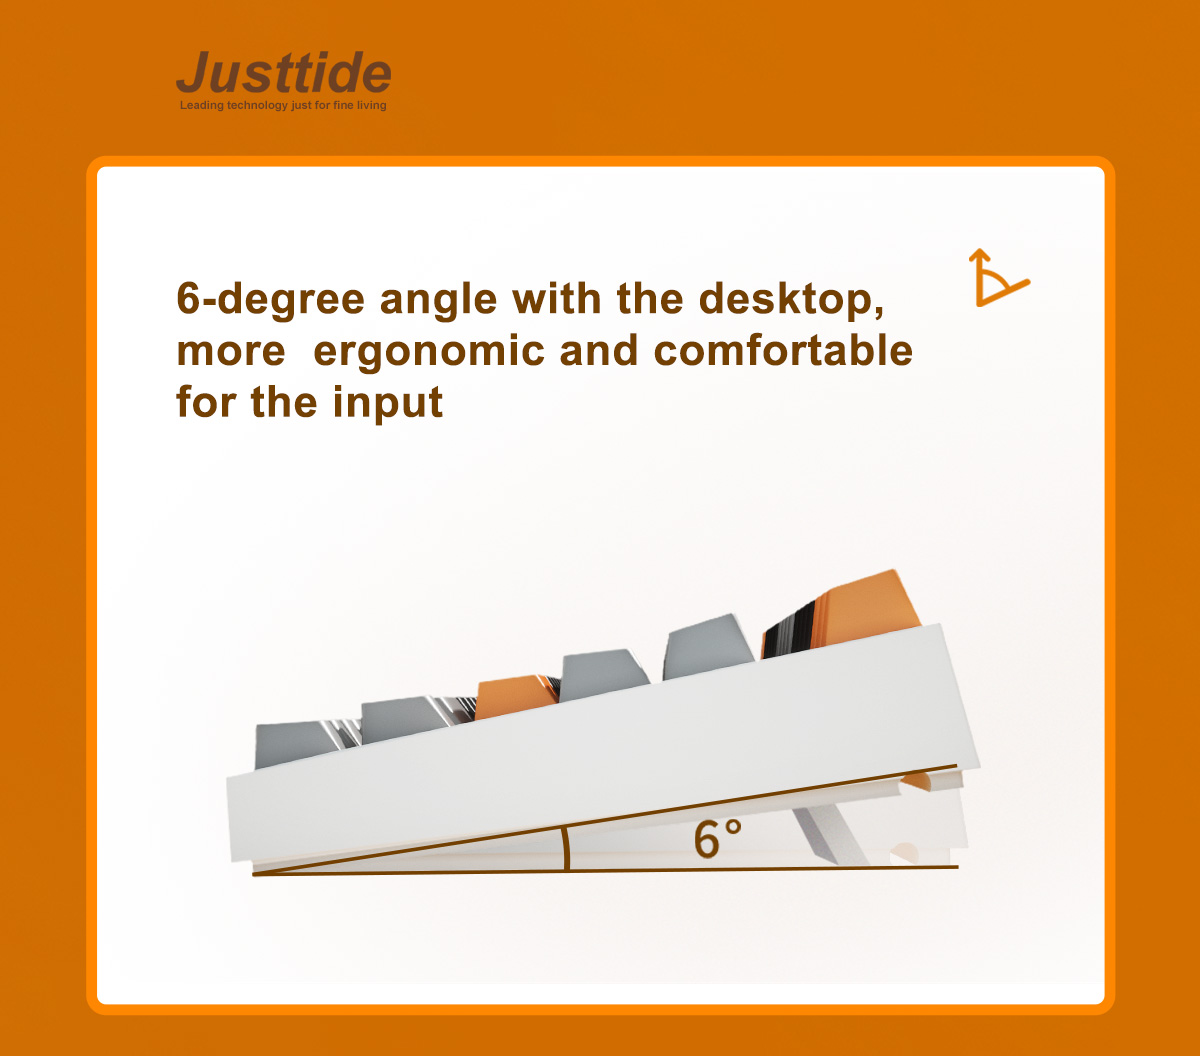 6 degree angle with the desktop,comforbale for the in put